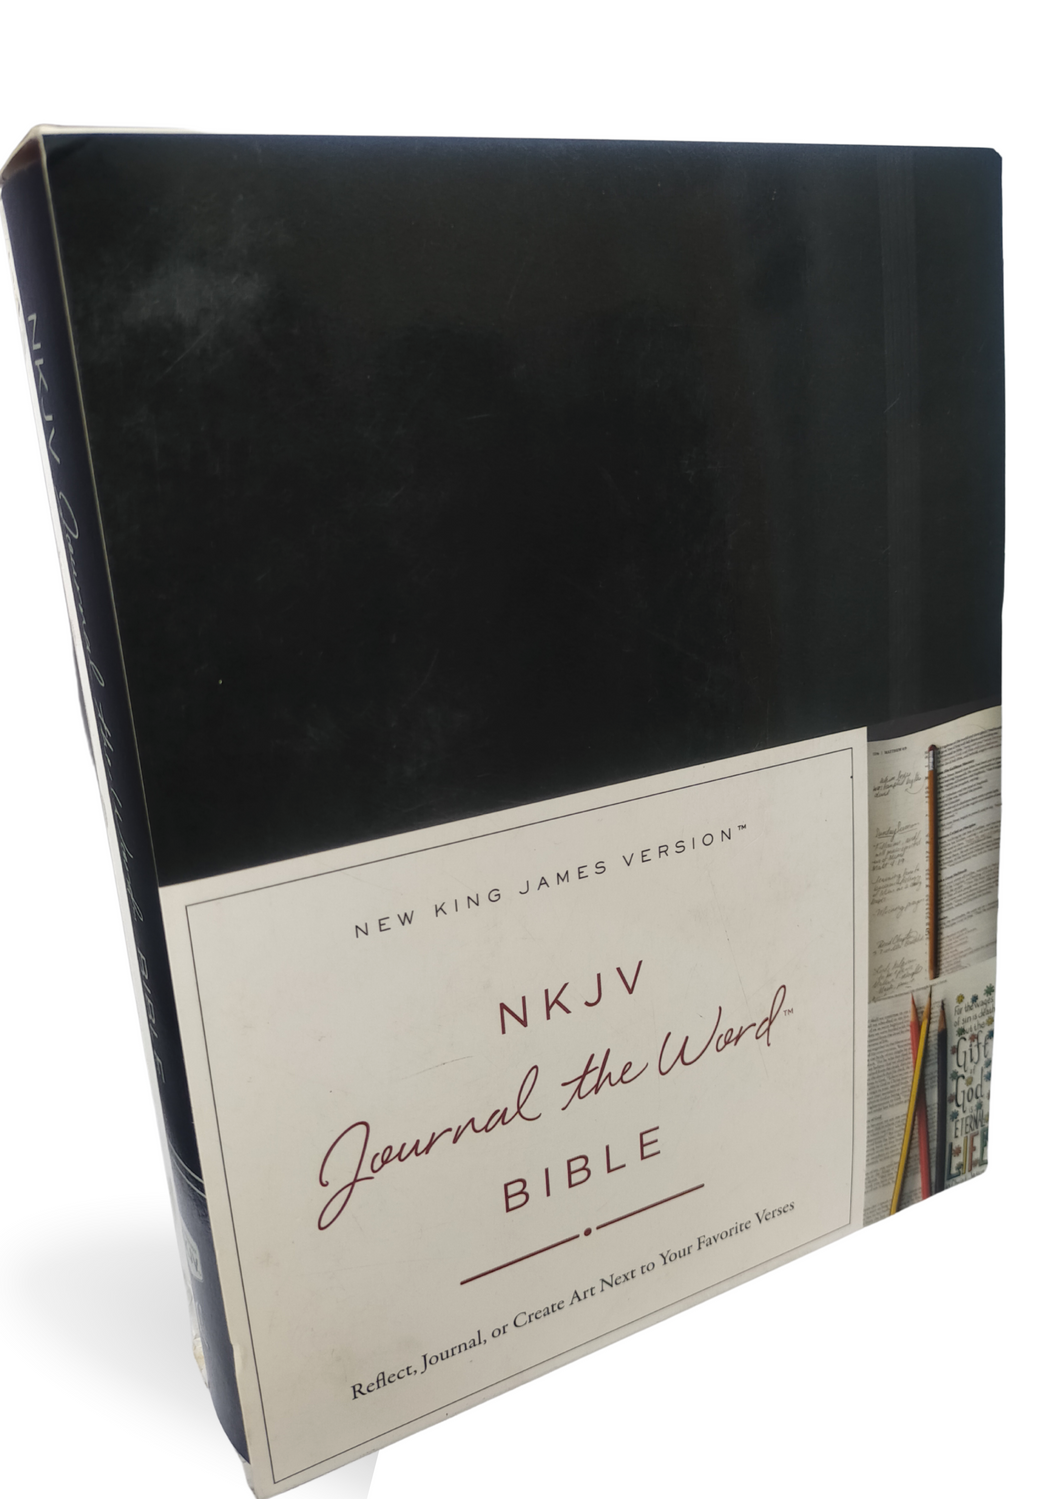 NKJV, Journal the Word Bible, Hardcover, Black, Red Letter Edition: Reflect, Journal, or Create Art Next to Your Favorite Verses Hardcover